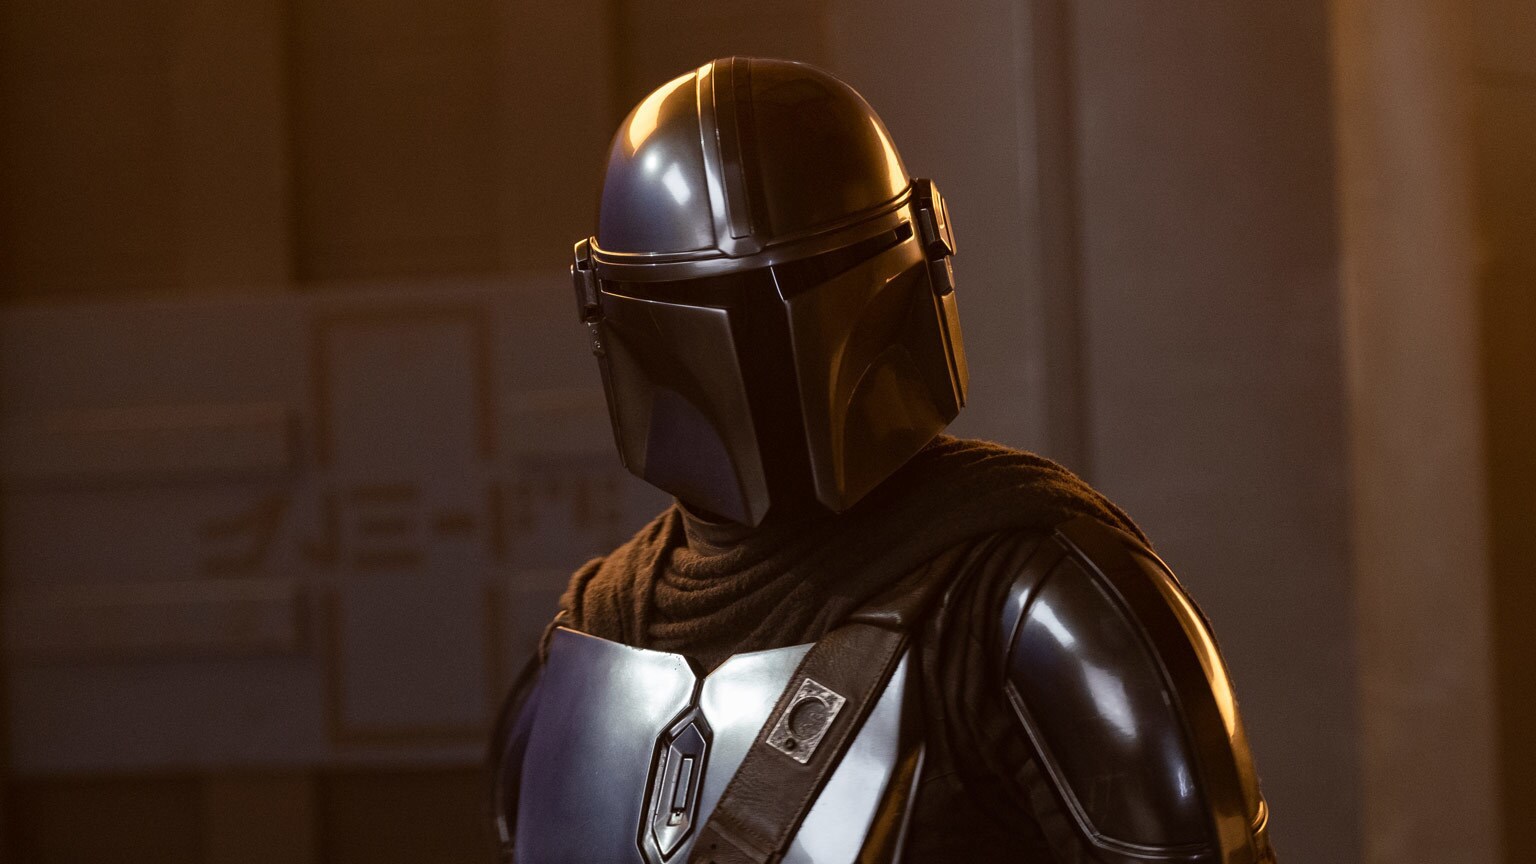 Bounty Hunting Highlights: 5 of Our Favorite Moments from The Mandalorian – “Chapter 22: Guns for Hire”